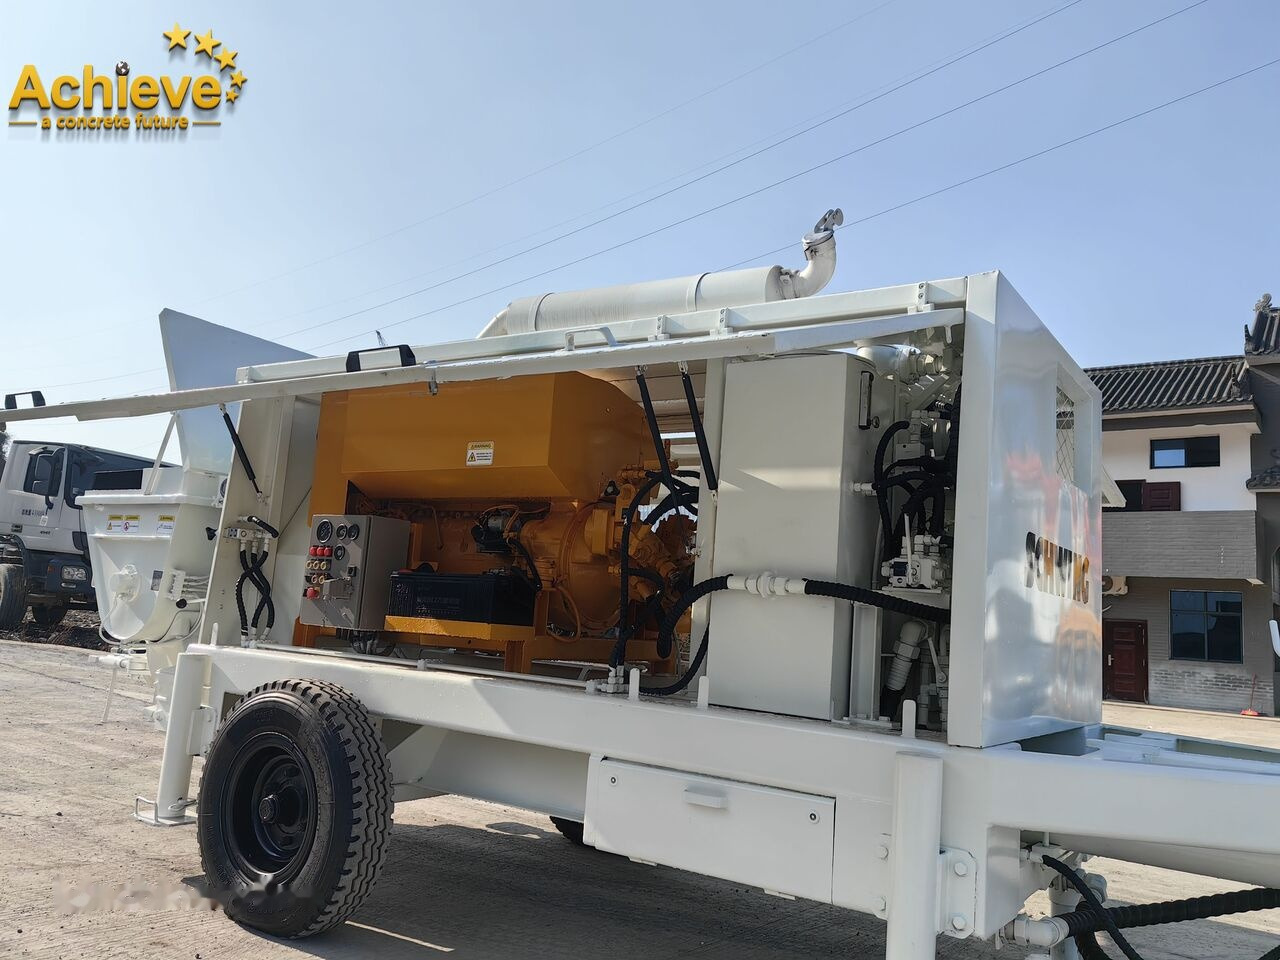 New Stationary concrete pump Schwing 【ACHIEVE】TOP CONDITION!!! Schwing Concrete Pump With Brand New H: picture 6